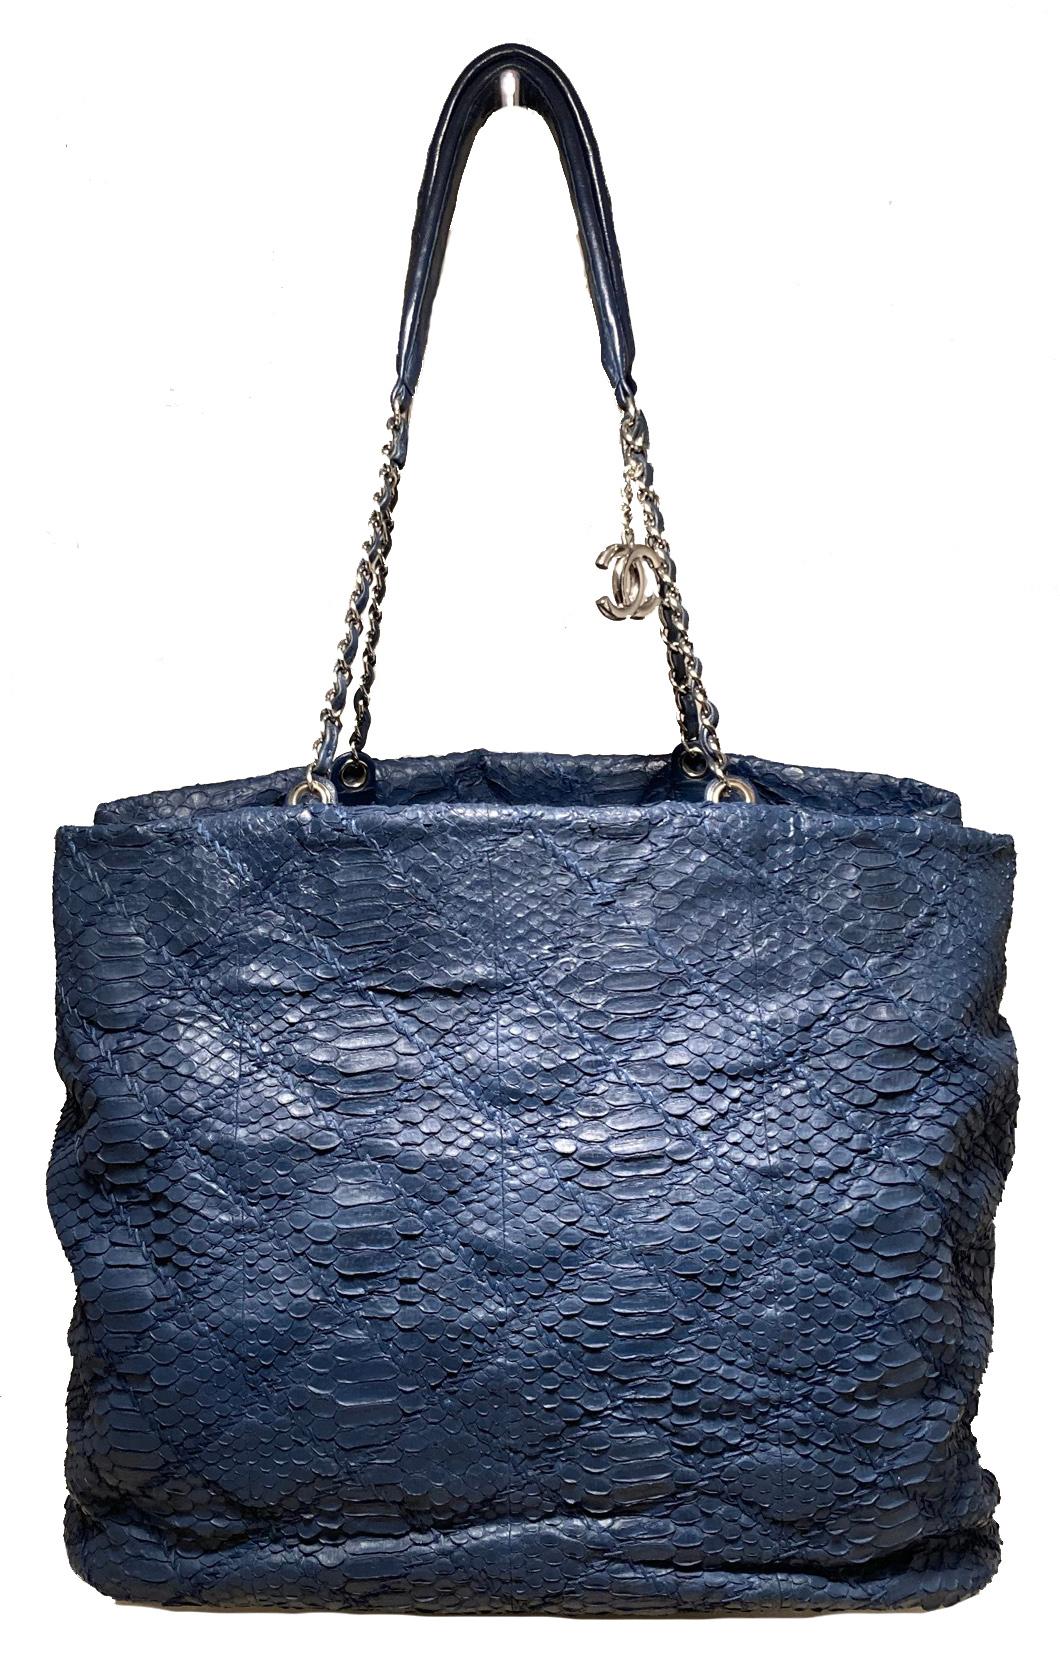 Chanel Navy Blue Quilted Matte Snakeskin Tote in excellent condition. Quilted navy blue matte snakeskin exterior trimmed with silver hardware and matching navy blue leather. Double woven chain and leather shoulder straps. Silver CC logo charm upon